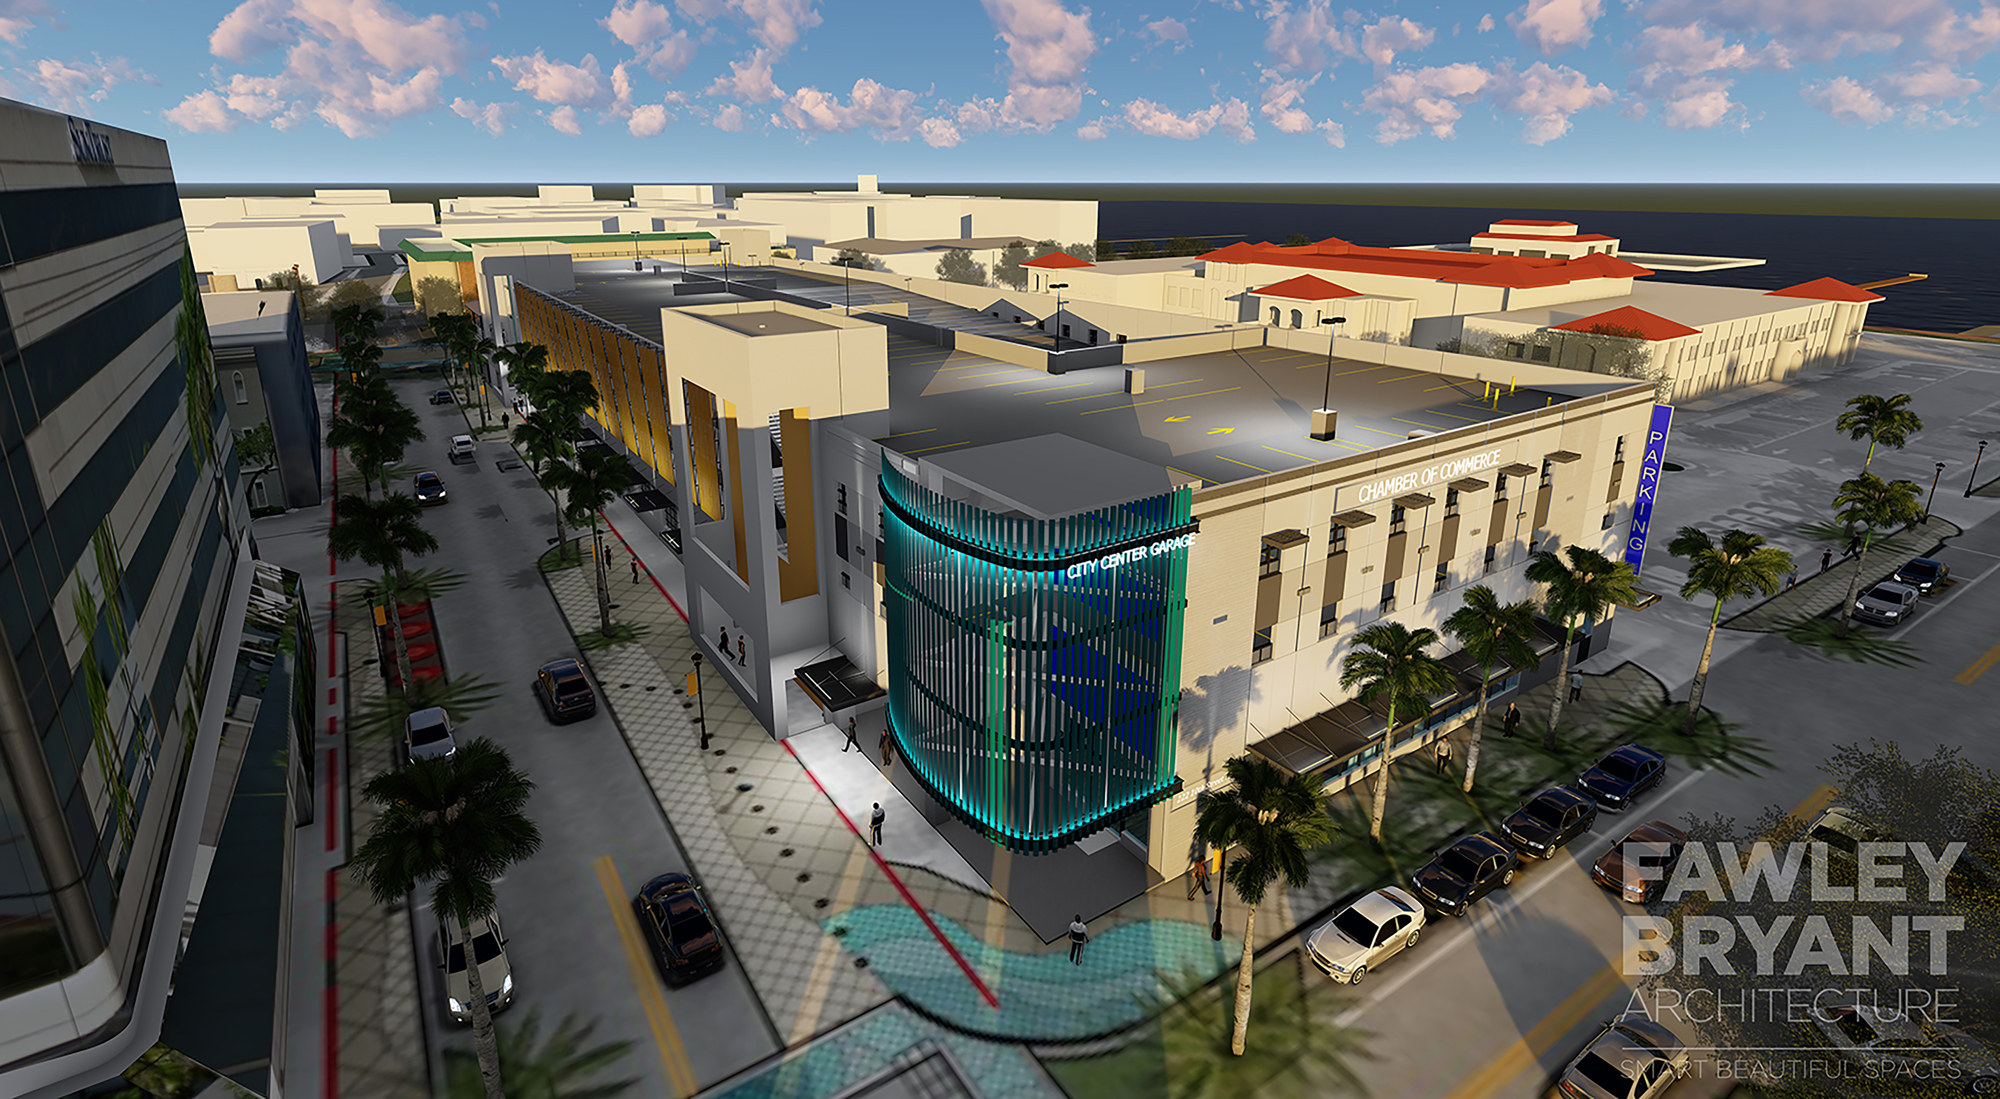 Courtesy. A rendering of the City Centre facility in the works for downtown Bradenton.